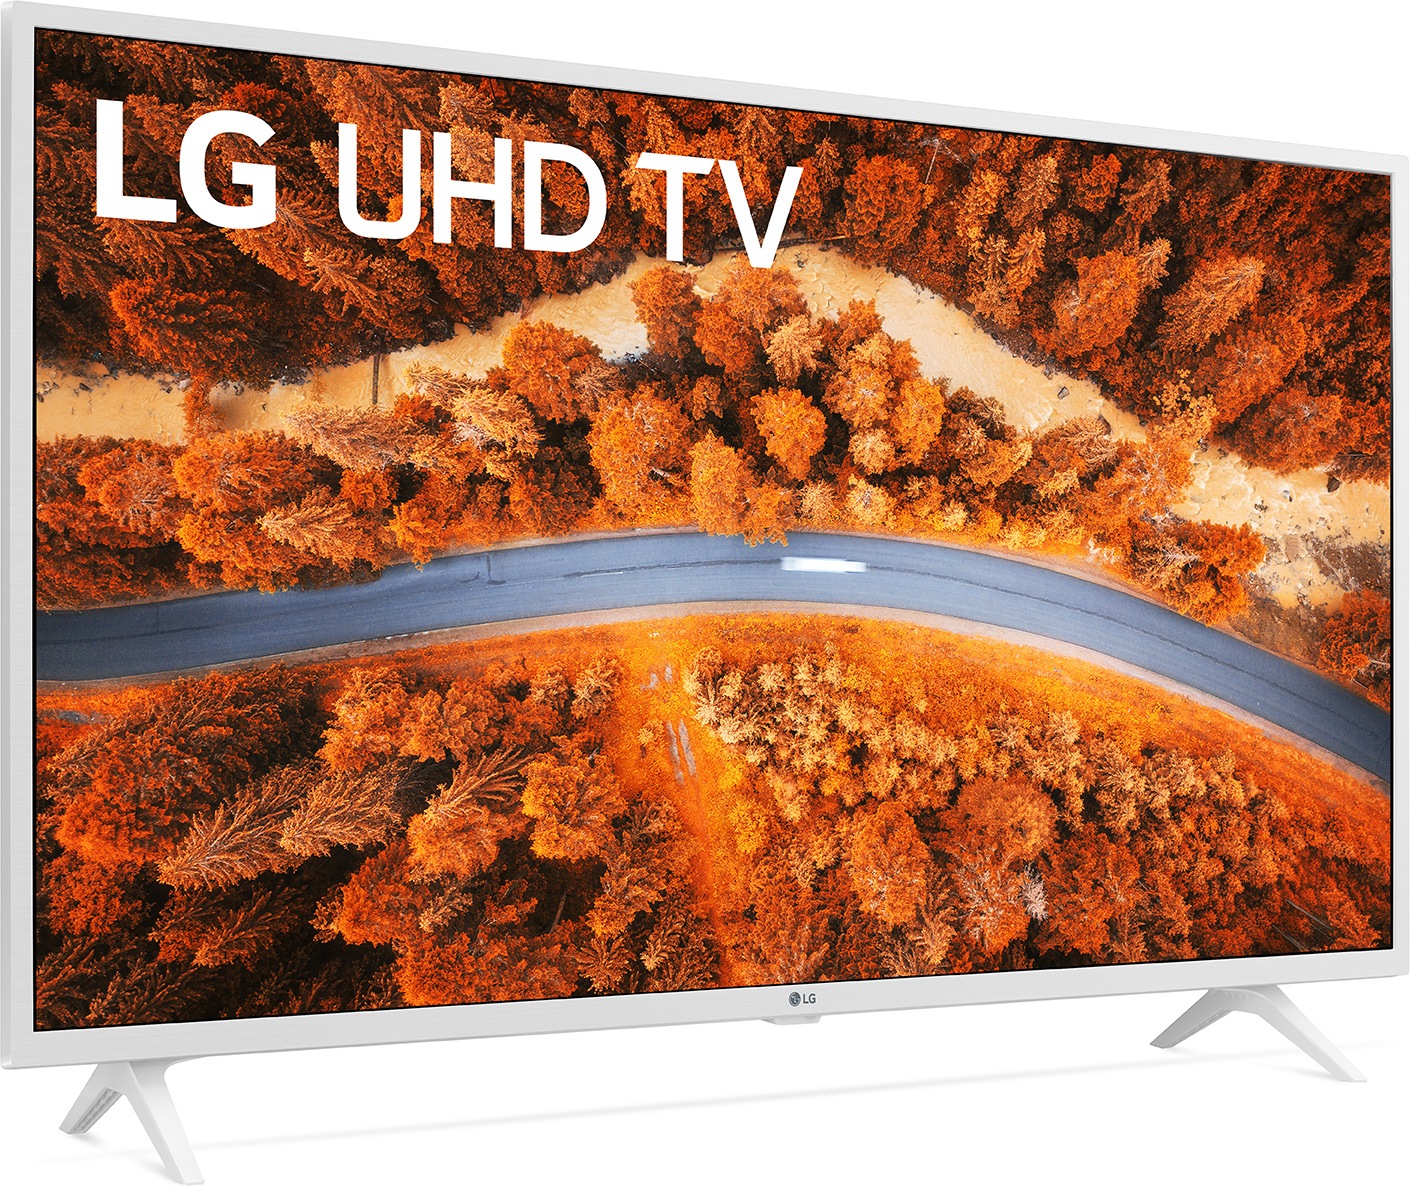 LG LCD-LED Fernseher »43UP76906LE, IPS«, 109 cm/43 Zoll, 4K Ultra HD, Smart-TV  jetzt bei OTTO